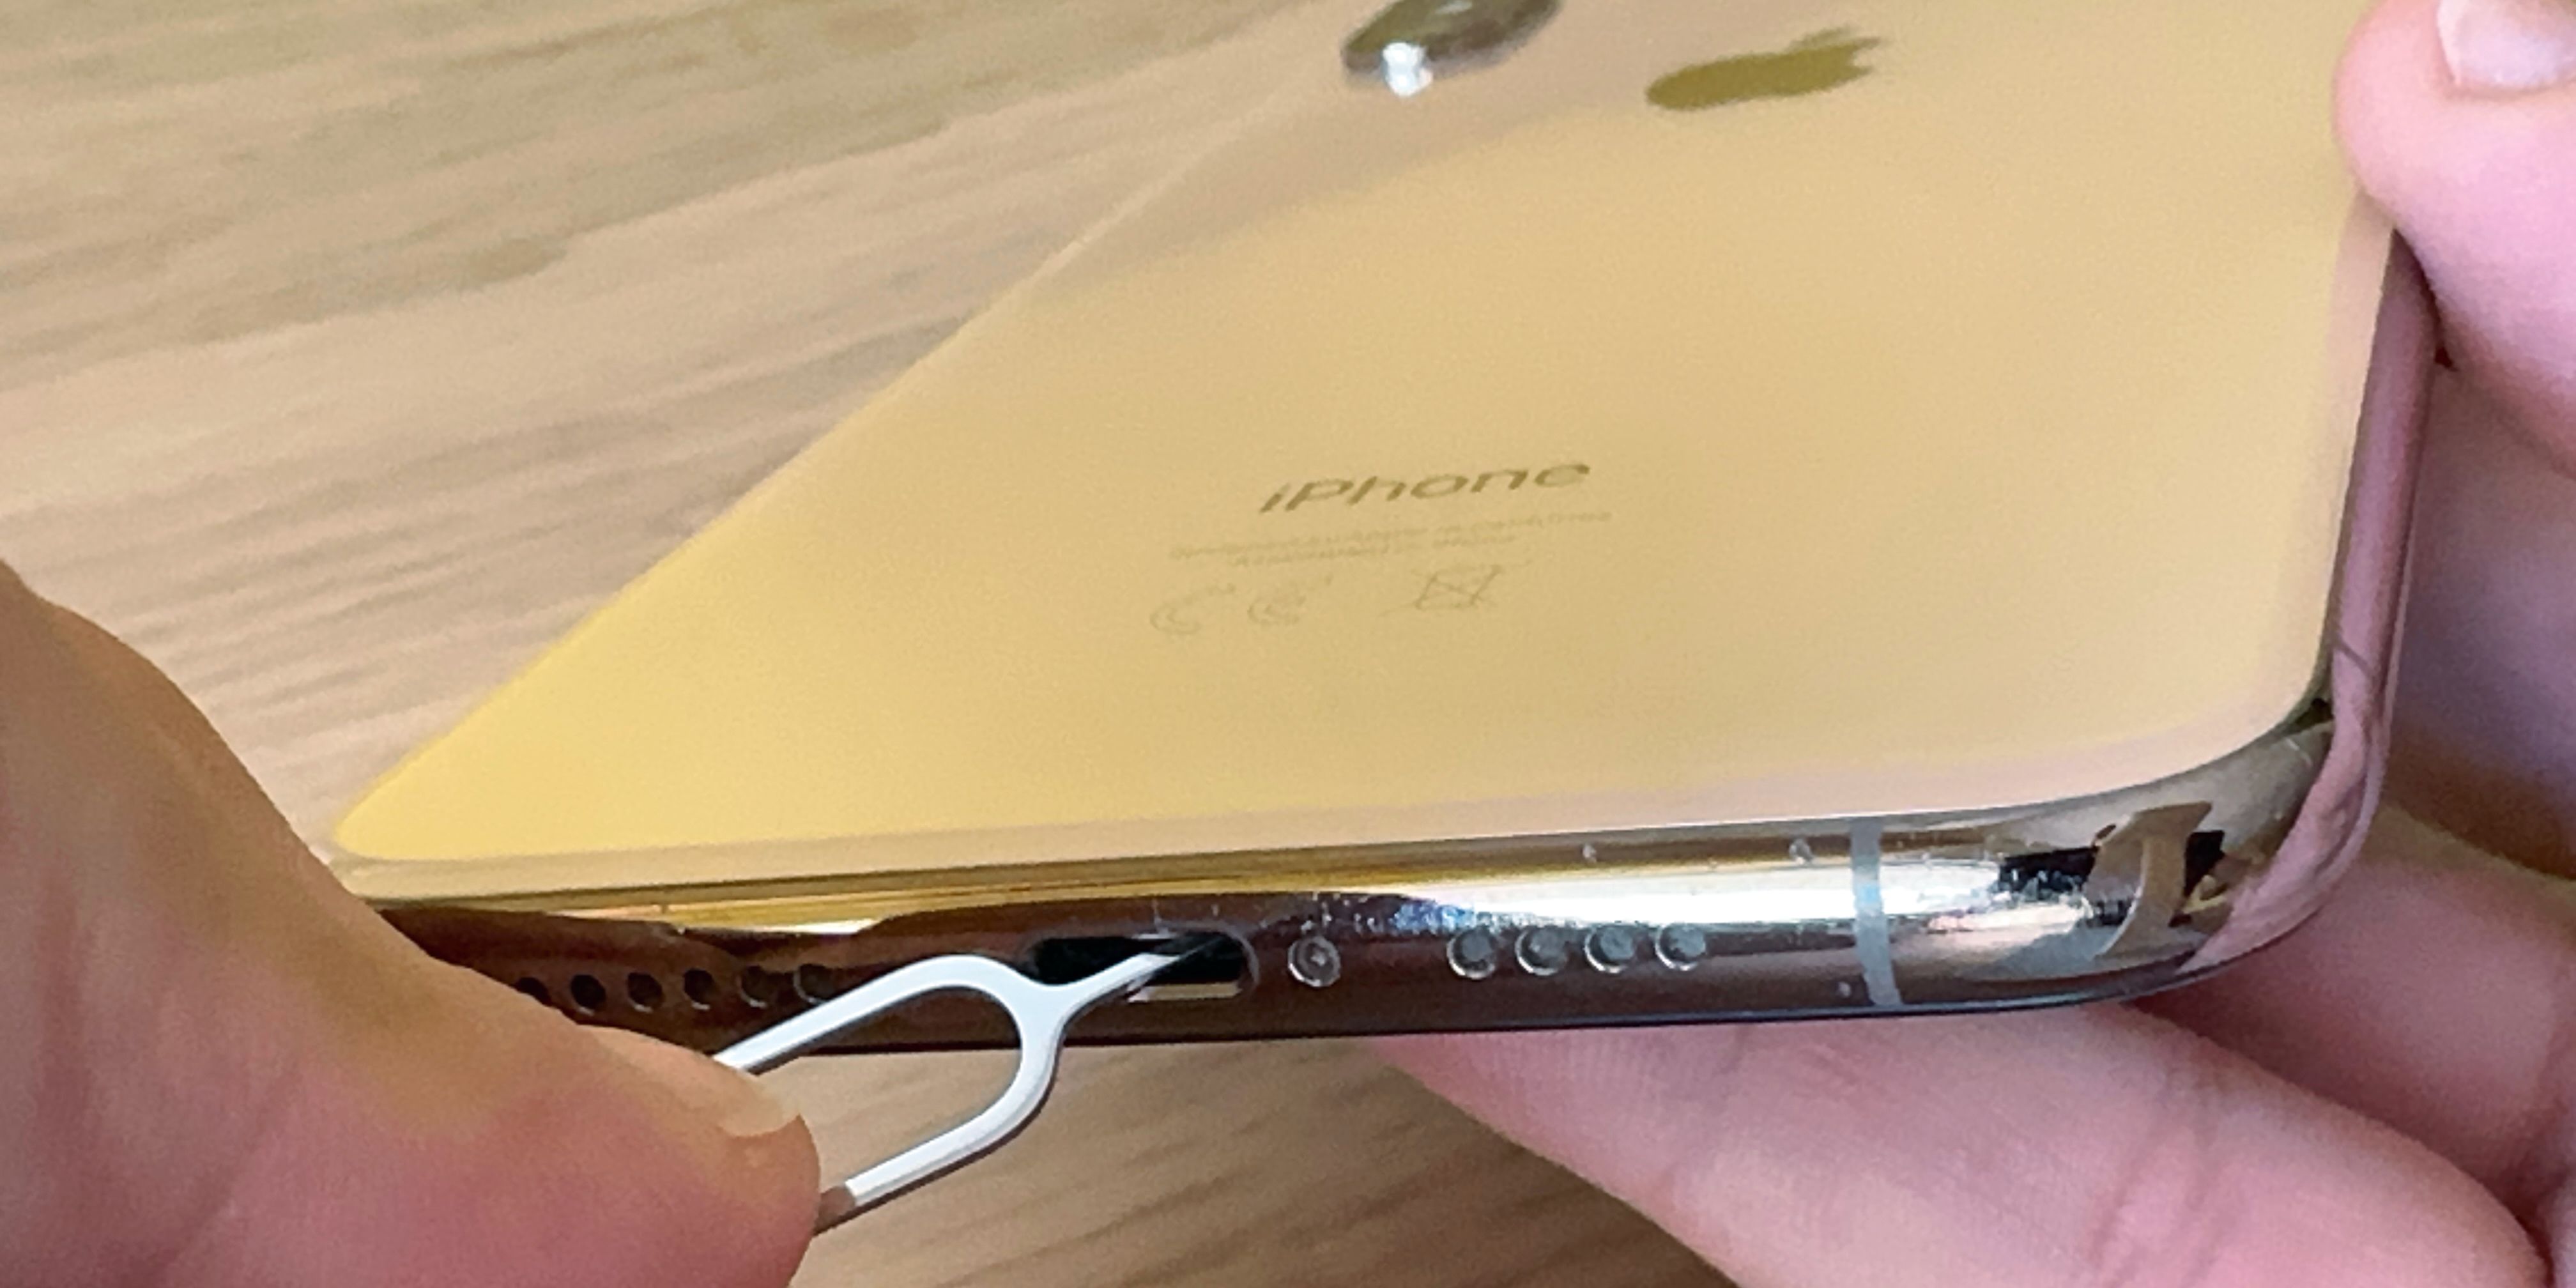 iPhone XS Max in hand, with a SIM Card Eject tool inserted in the Lightning port